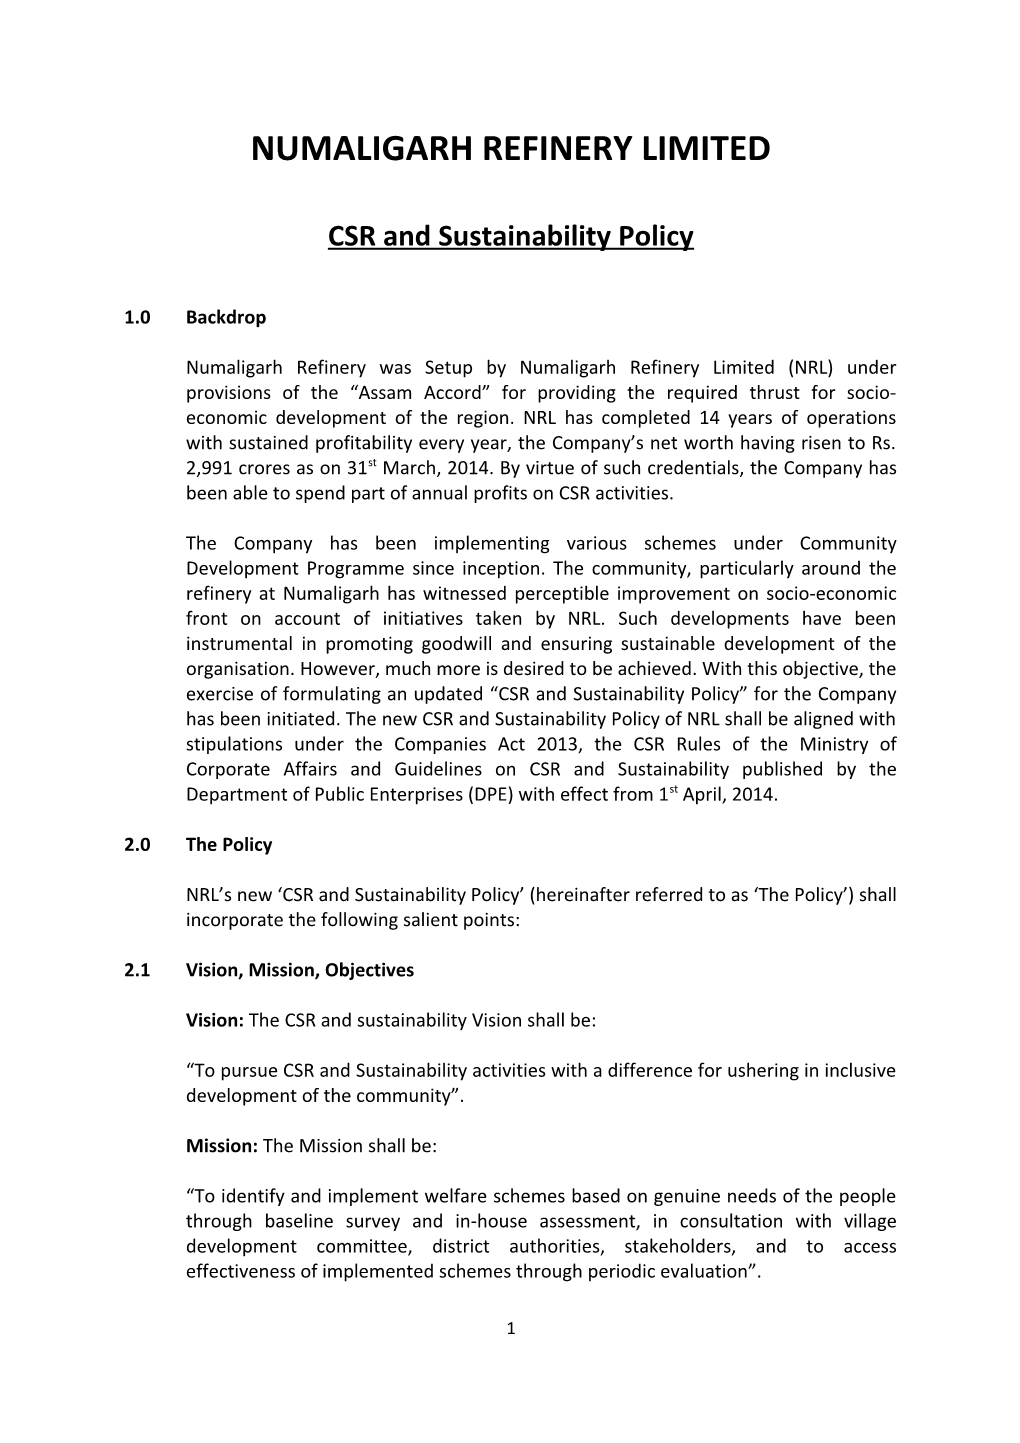 CSR and Sustainability Policy